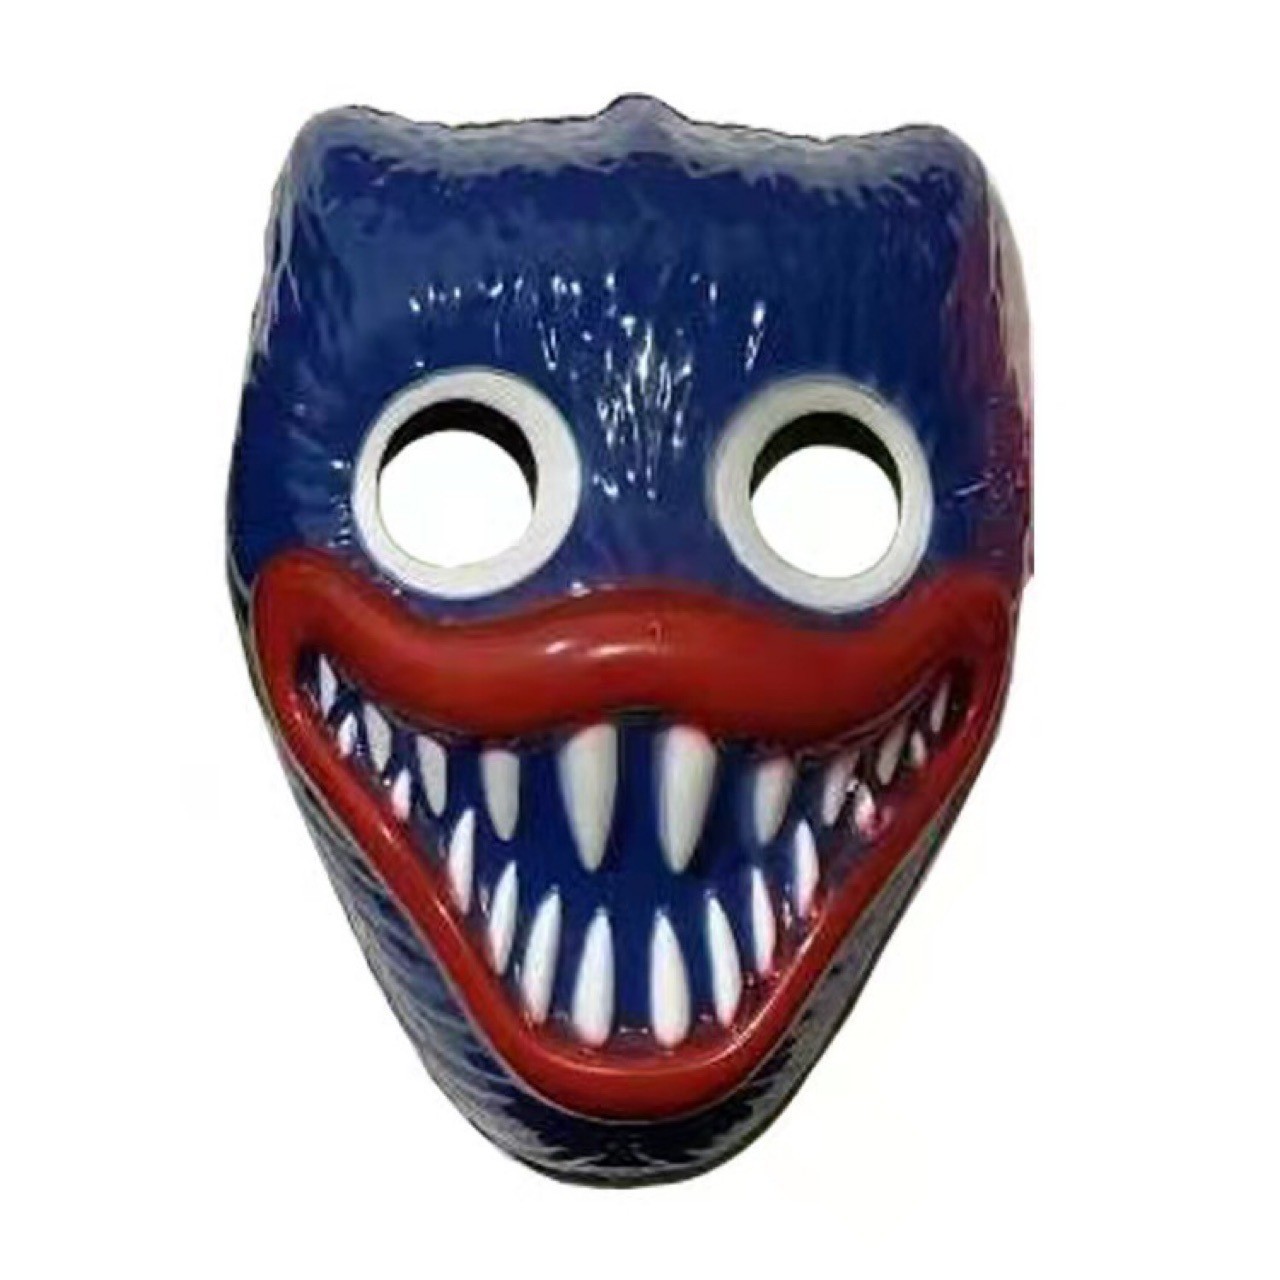 Bobby's Game Time Poppy Playtime Halloween Mask New Plastic Half Face Mask Wholesale